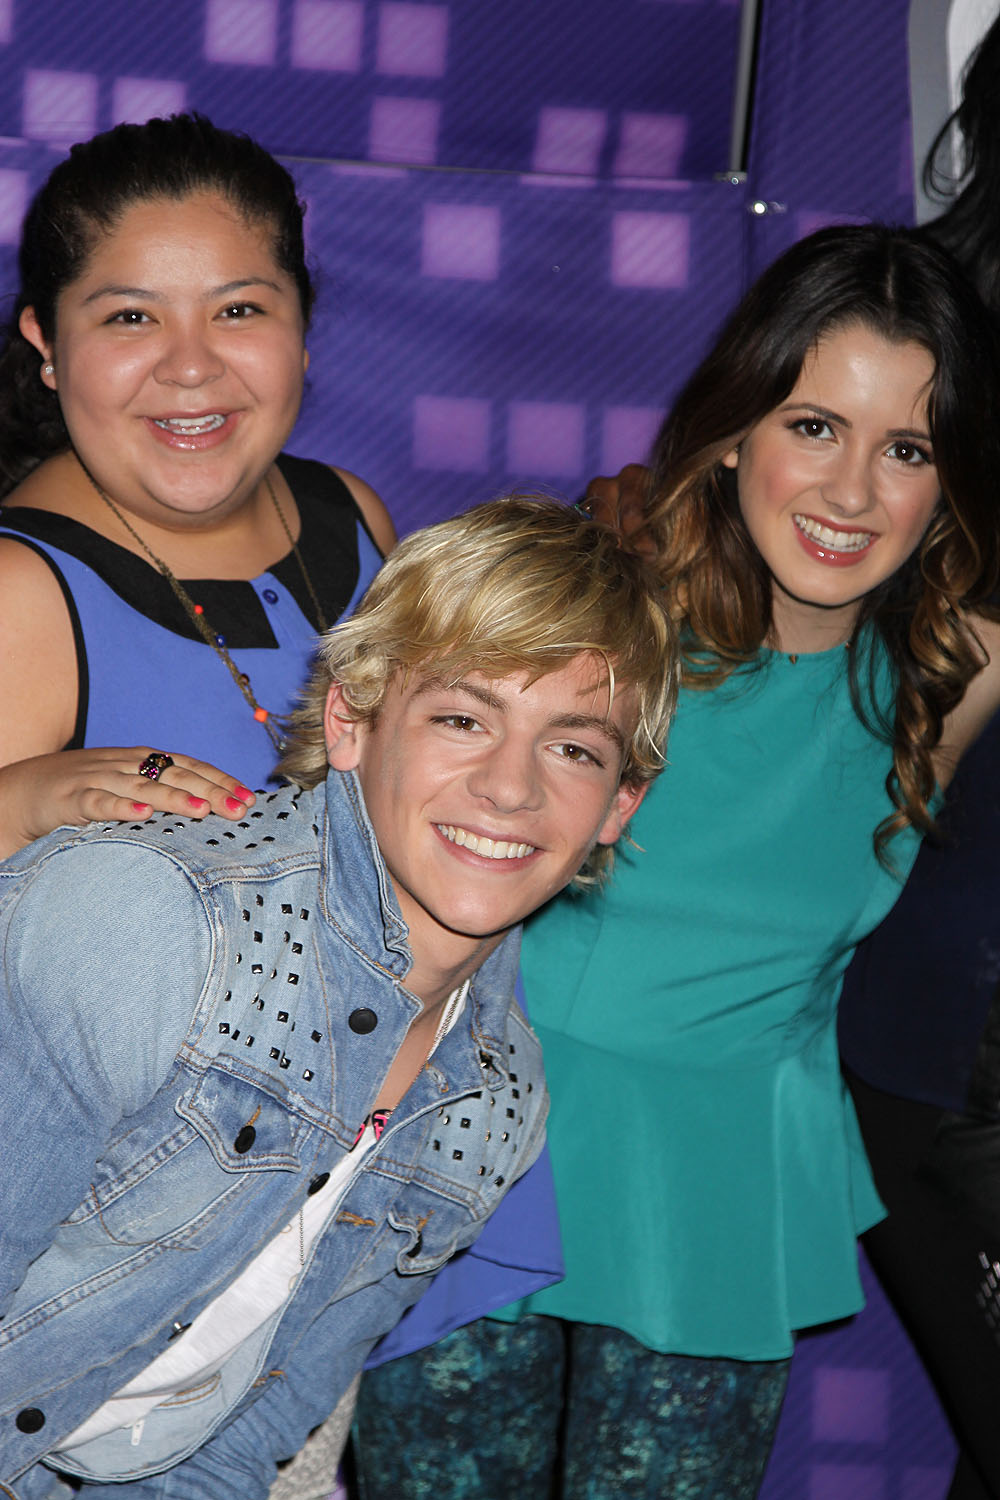 Exclusive Interview and Photo: AUSTIN & ALLY star Ross Lynch on fame, music and family